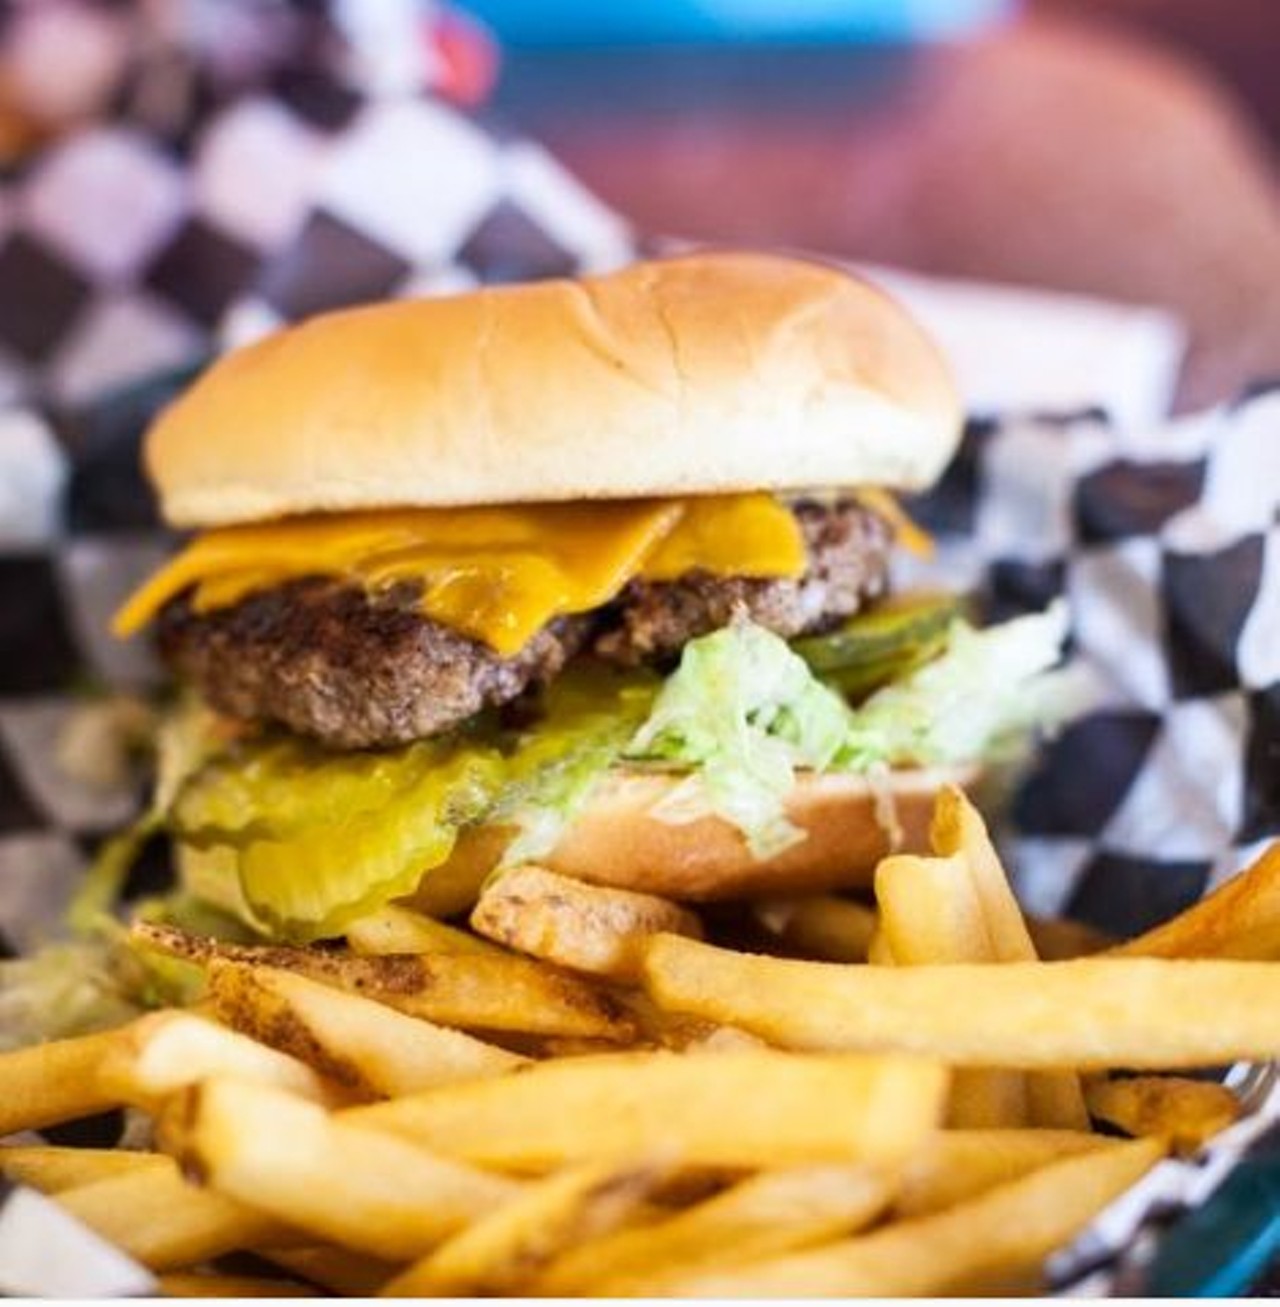 Cheesy Jane&#146;s
4200 Broadway St, (210) 826-0800, 
cheesyjanes.com
With it&#146;s sock hop vibes, creamy milk shakes and cheese-filled burgers, Cheesy Janes is a great family friendly burger joint.
Photo via Instagram
femalefoodie_satx
